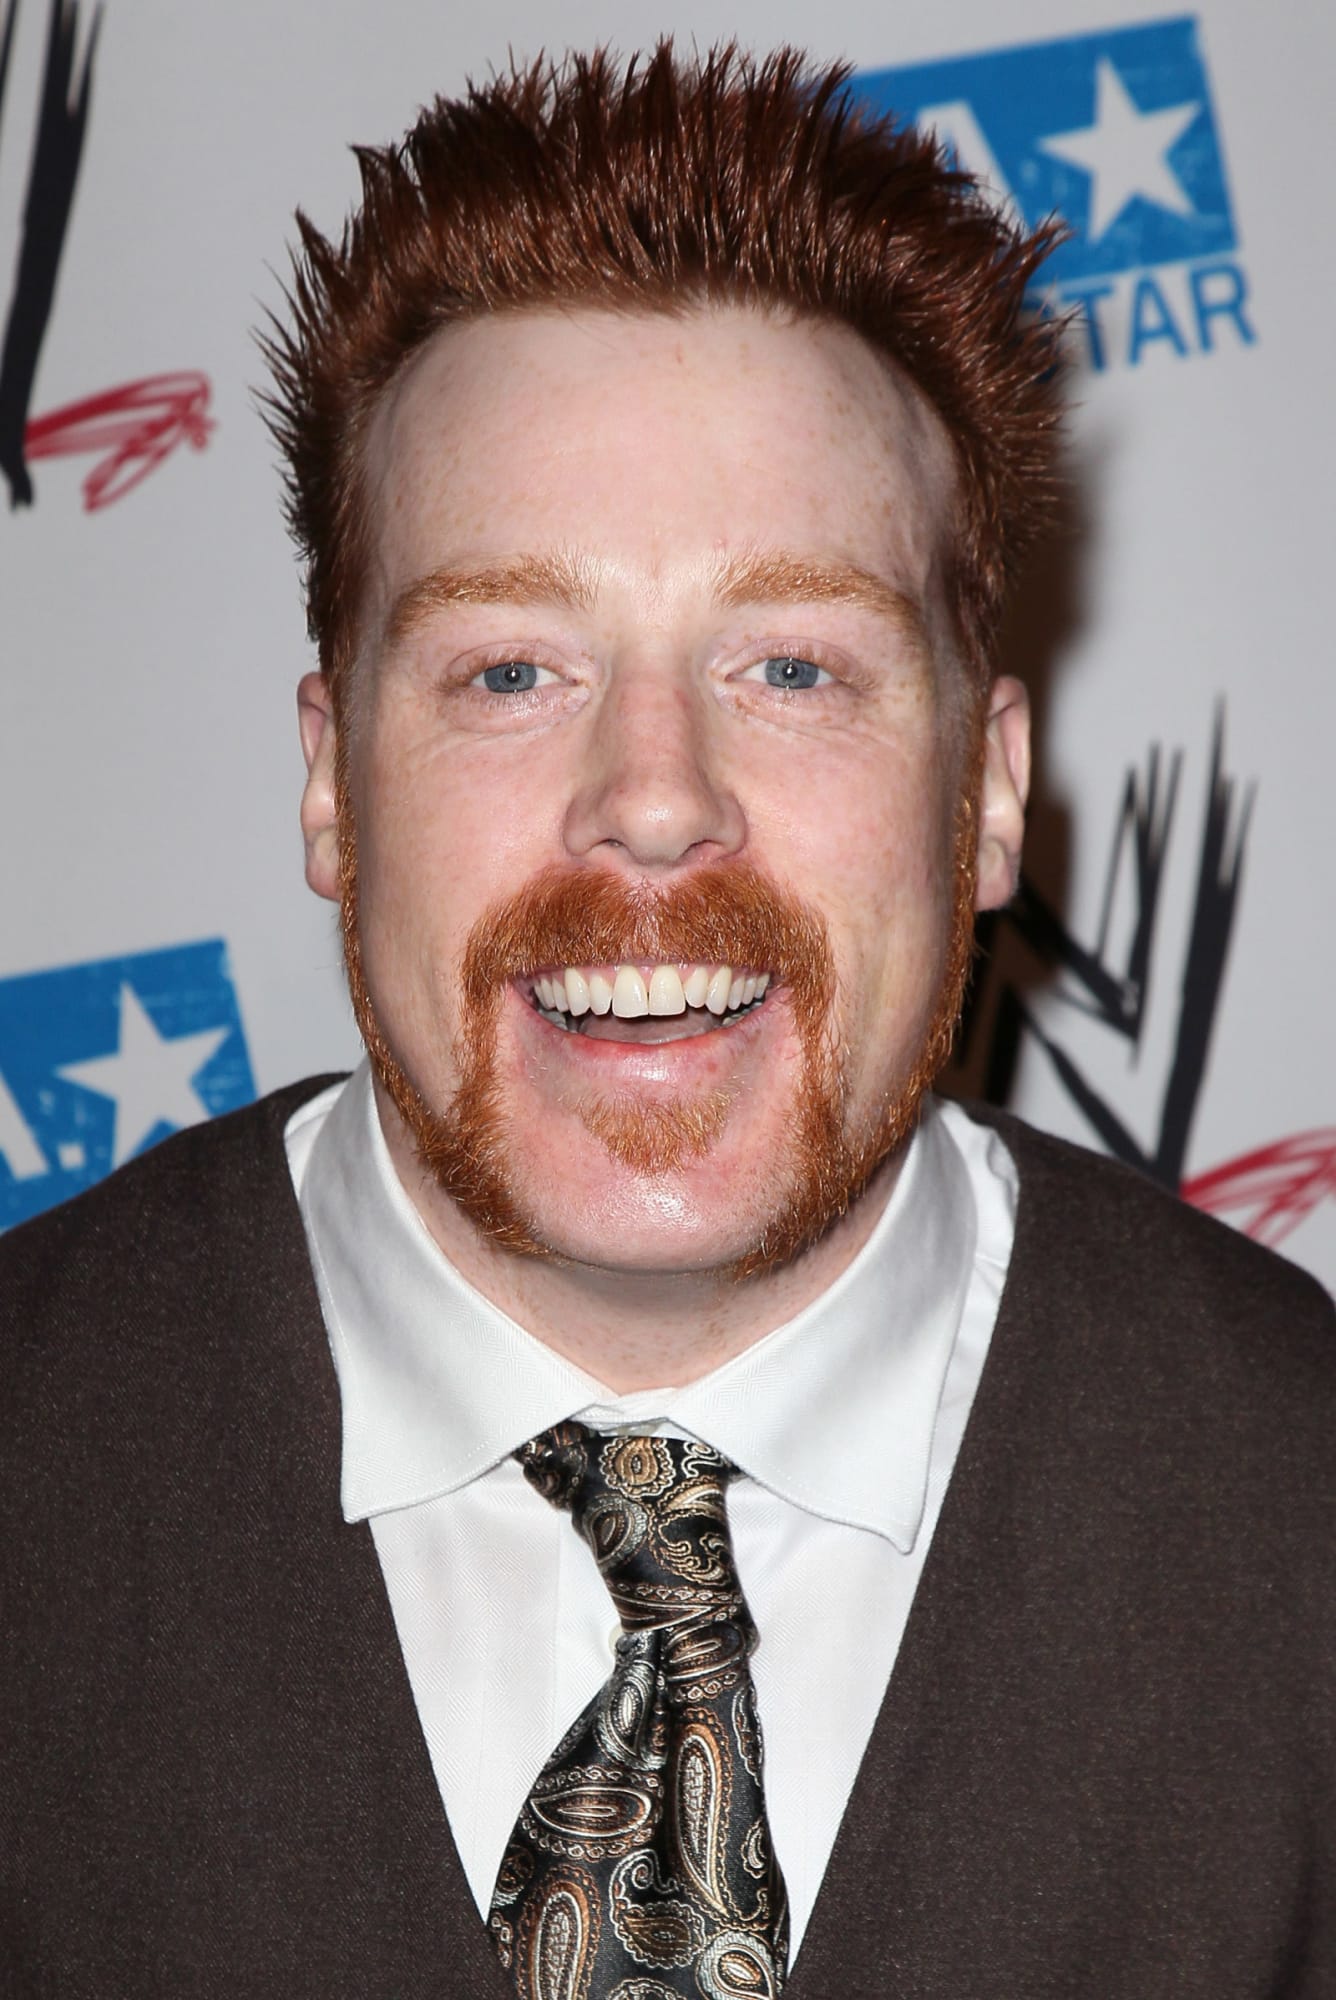 WWE: Sheamus returned with new/old hair, and he hyped 3 killer feuds